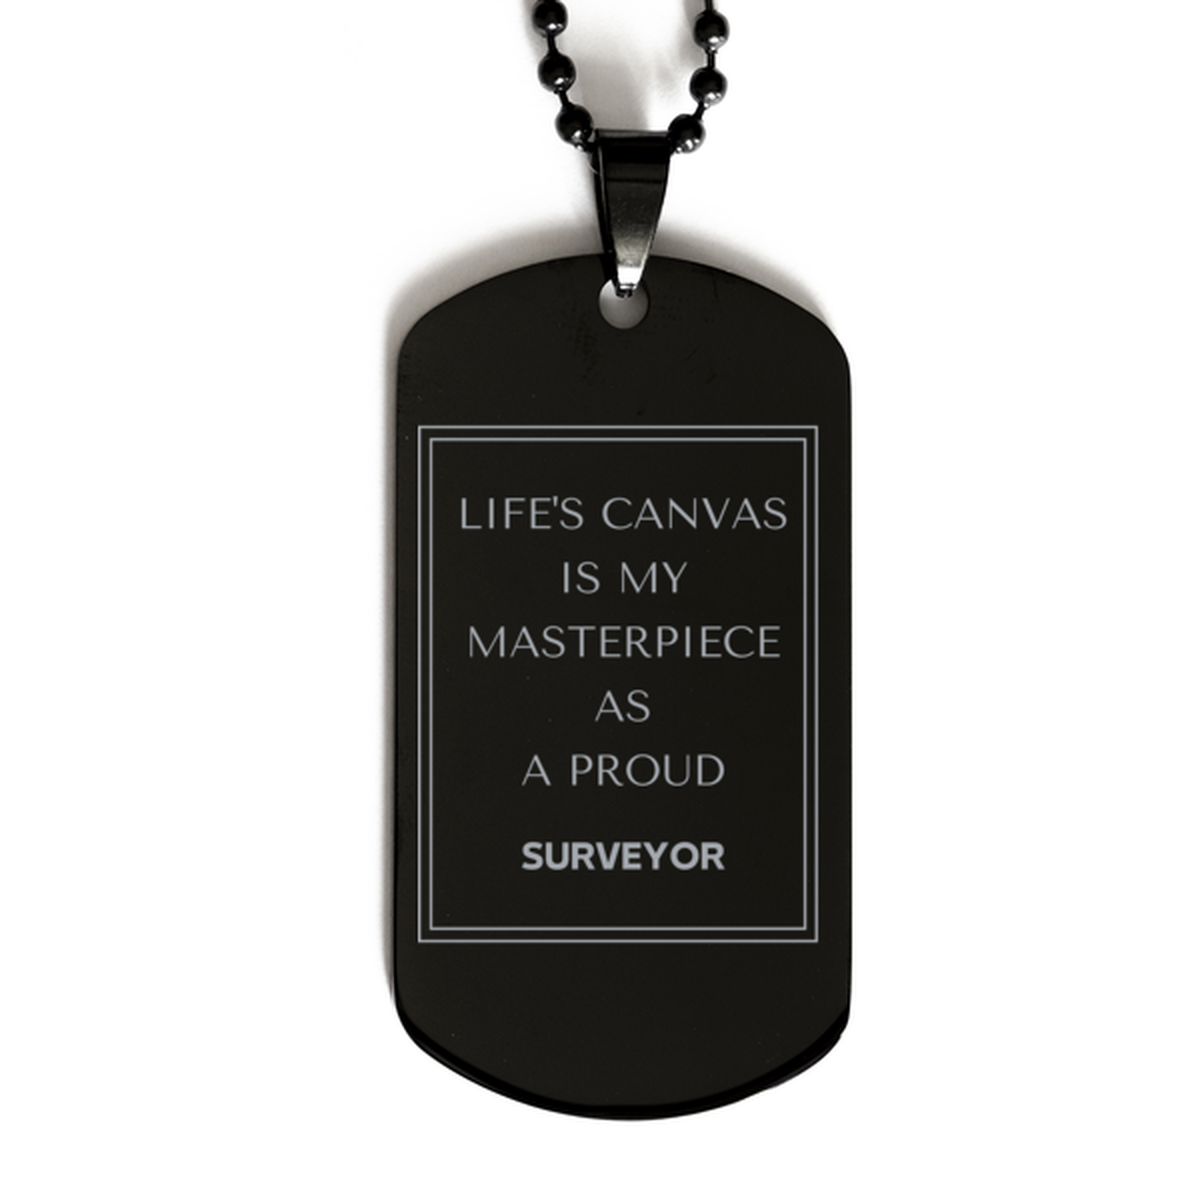 Proud Surveyor Gifts, Life's canvas is my masterpiece, Epic Birthday Christmas Unique Black Dog Tag For Surveyor, Coworkers, Men, Women, Friends